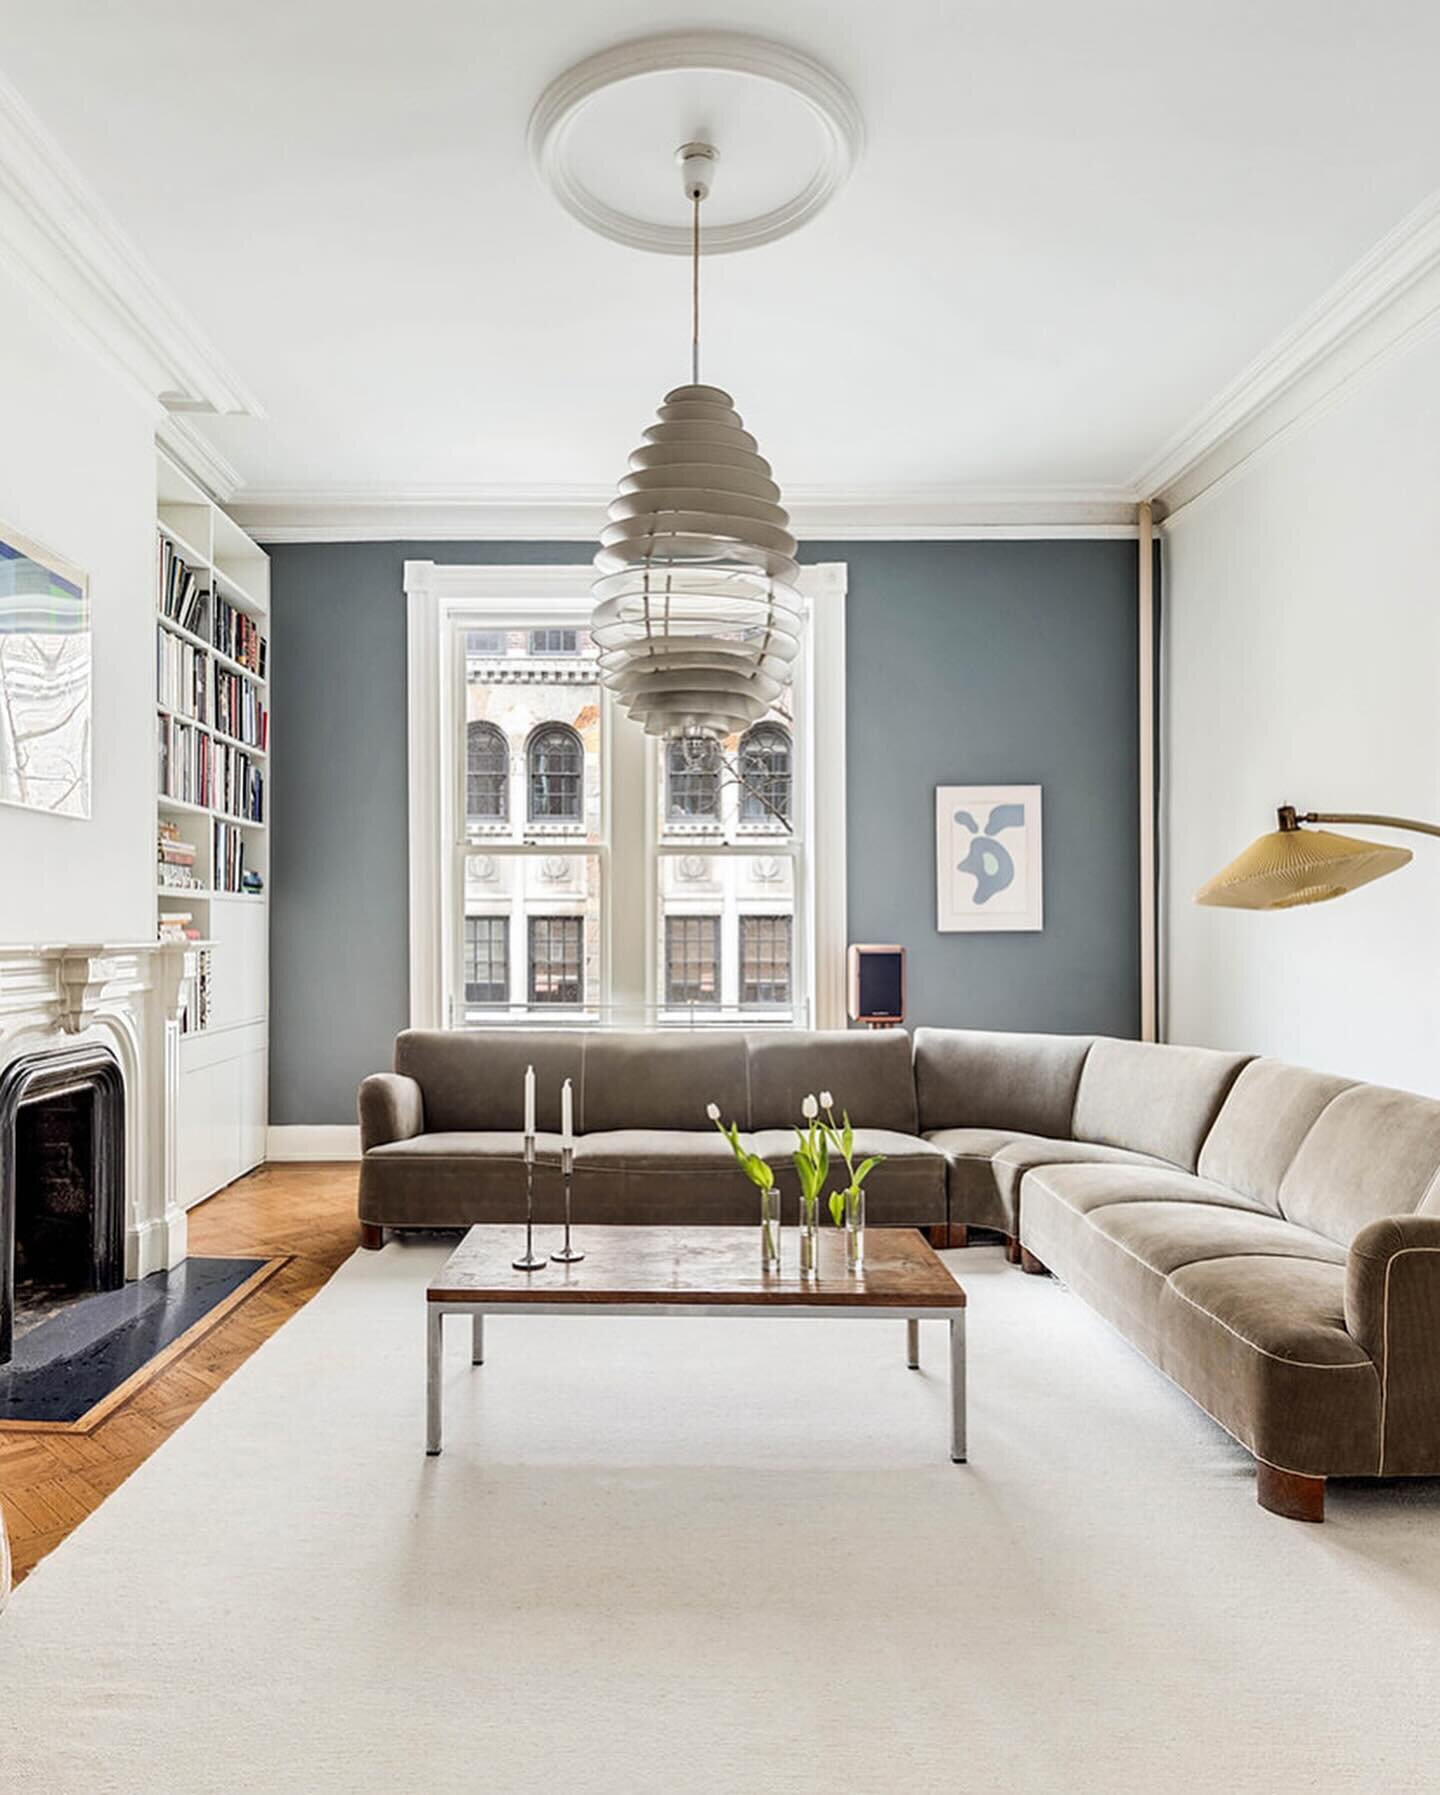 Dazzling 25&rsquo; wide, parlor duplex located on an iconic block in Brooklyn Heights with loads of details: 3 bed, 2.5 bath, 3 working fireplaces, high ceilings and landscaped garden. 

For Rent! 💫

Open house today - 1:30p - 3p by appointment only